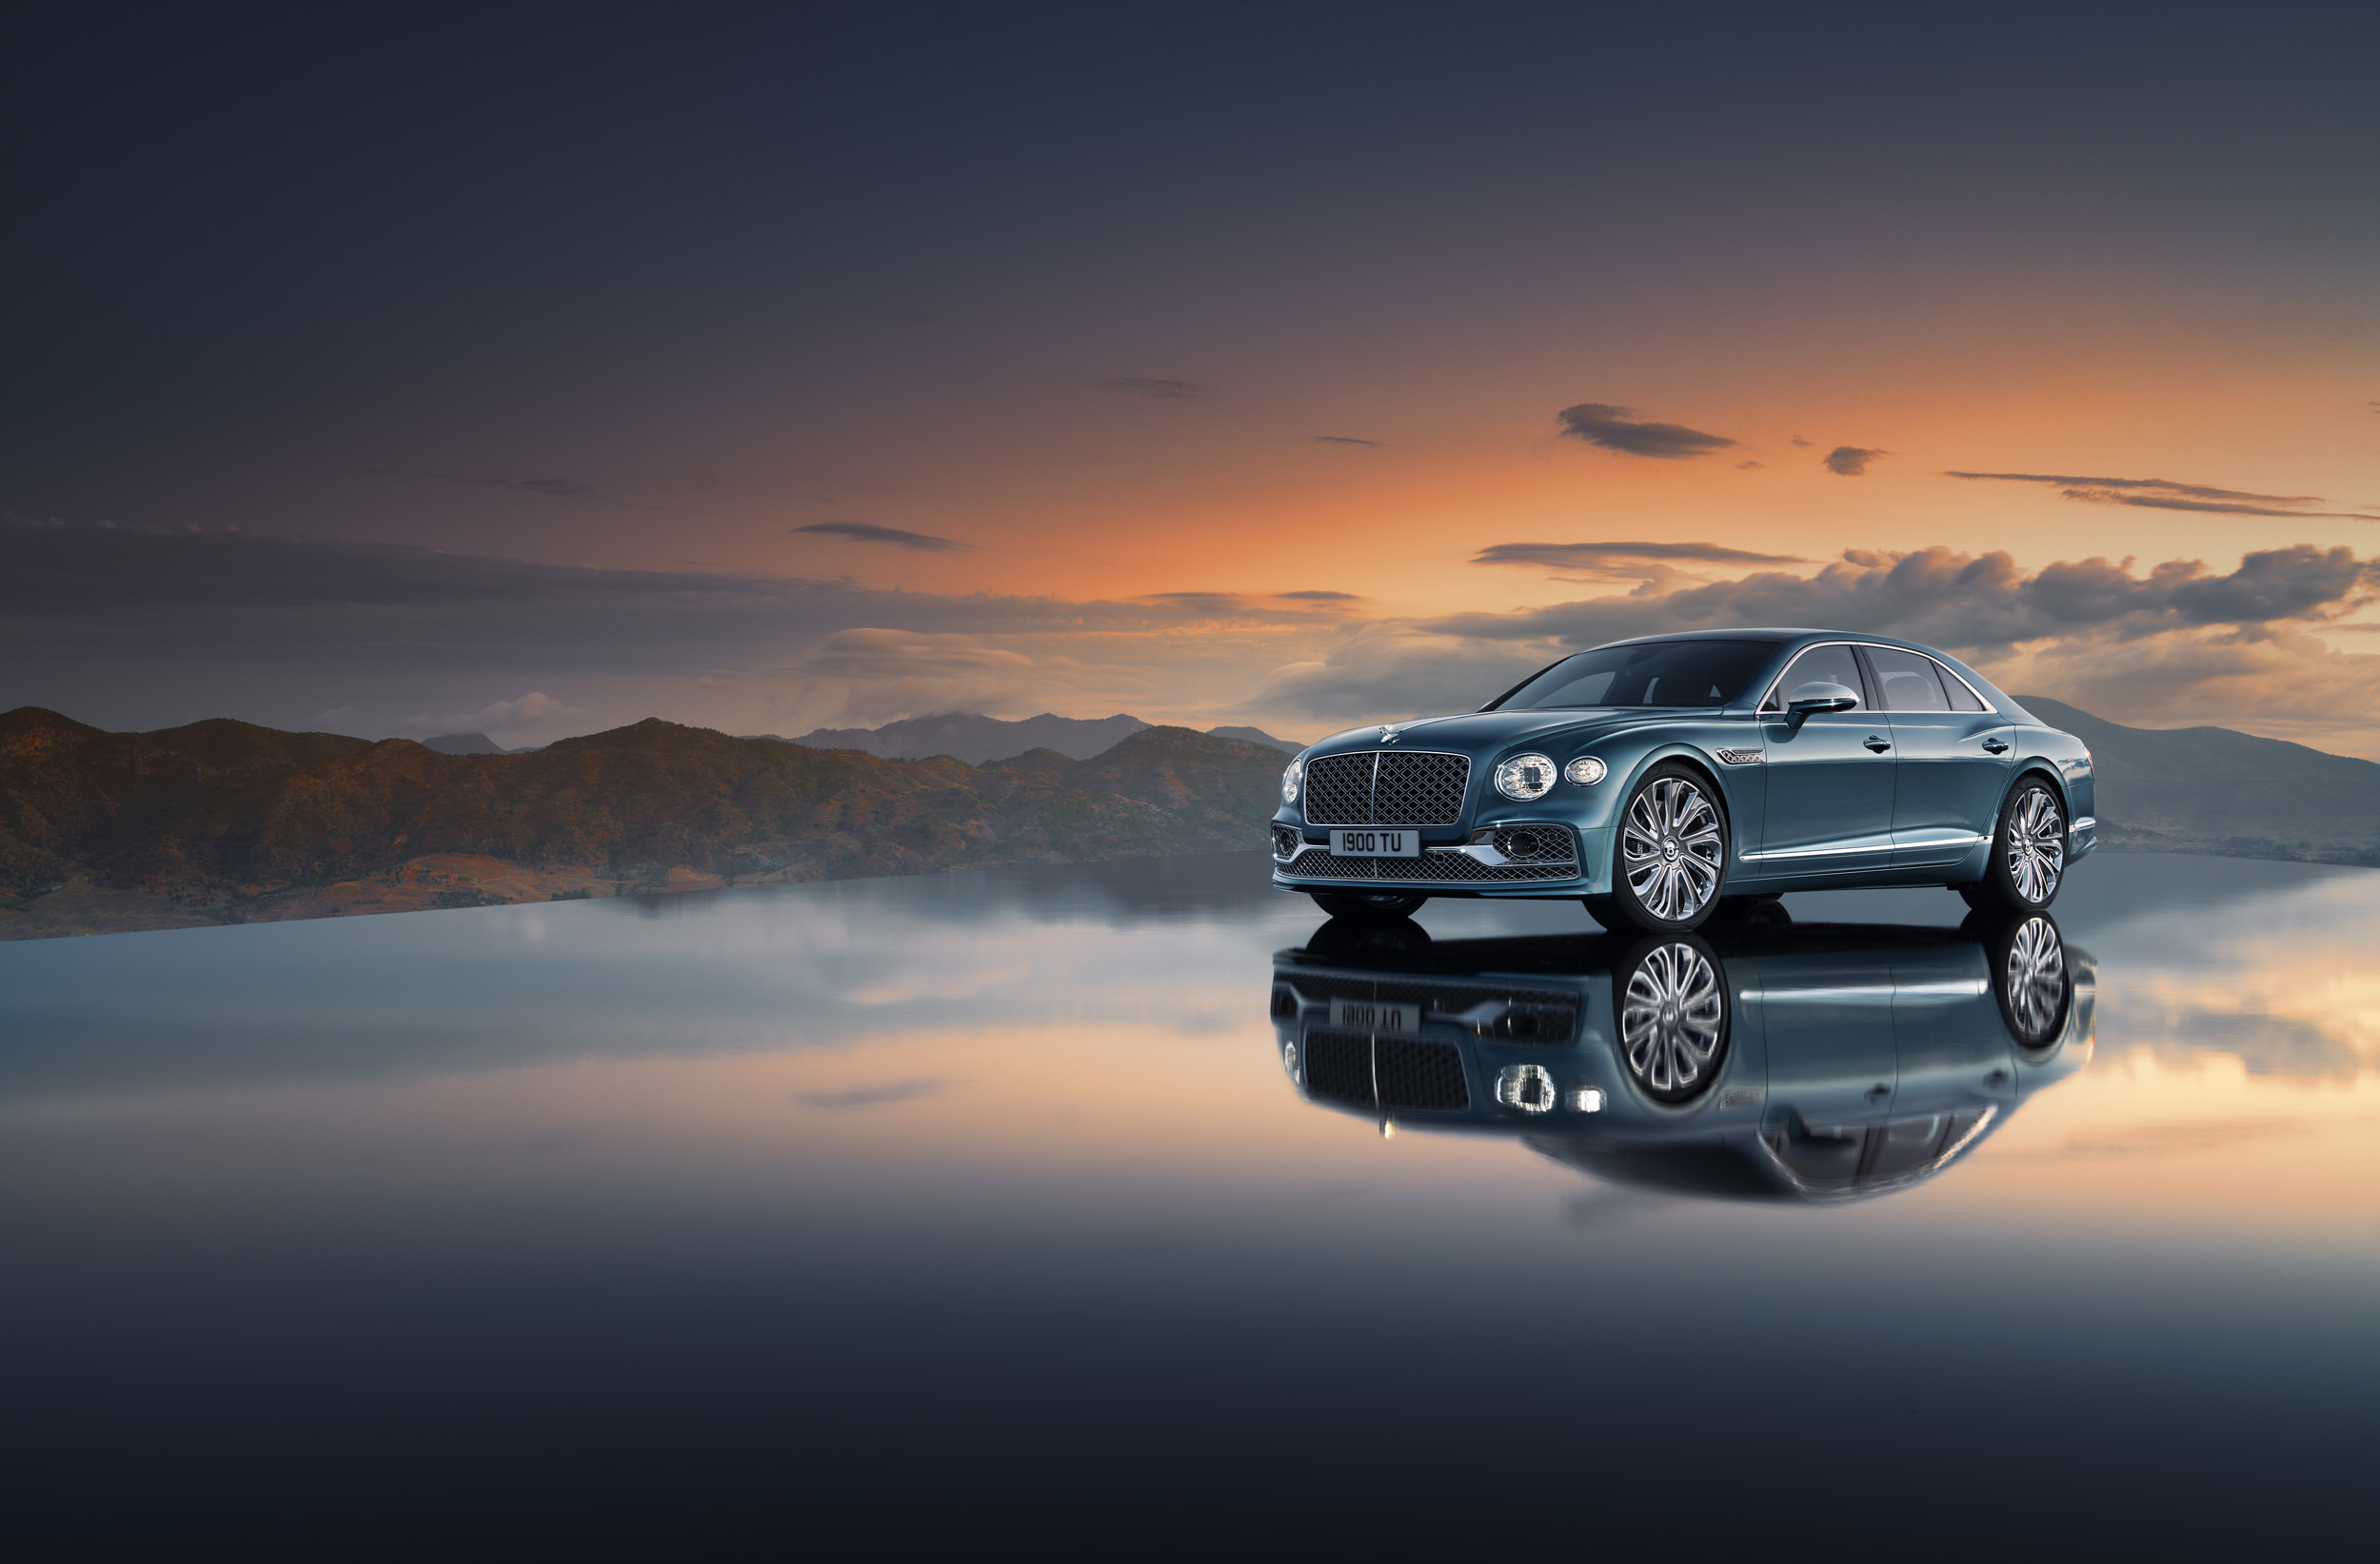 Sunrises, Sunsets and a Flying Spur